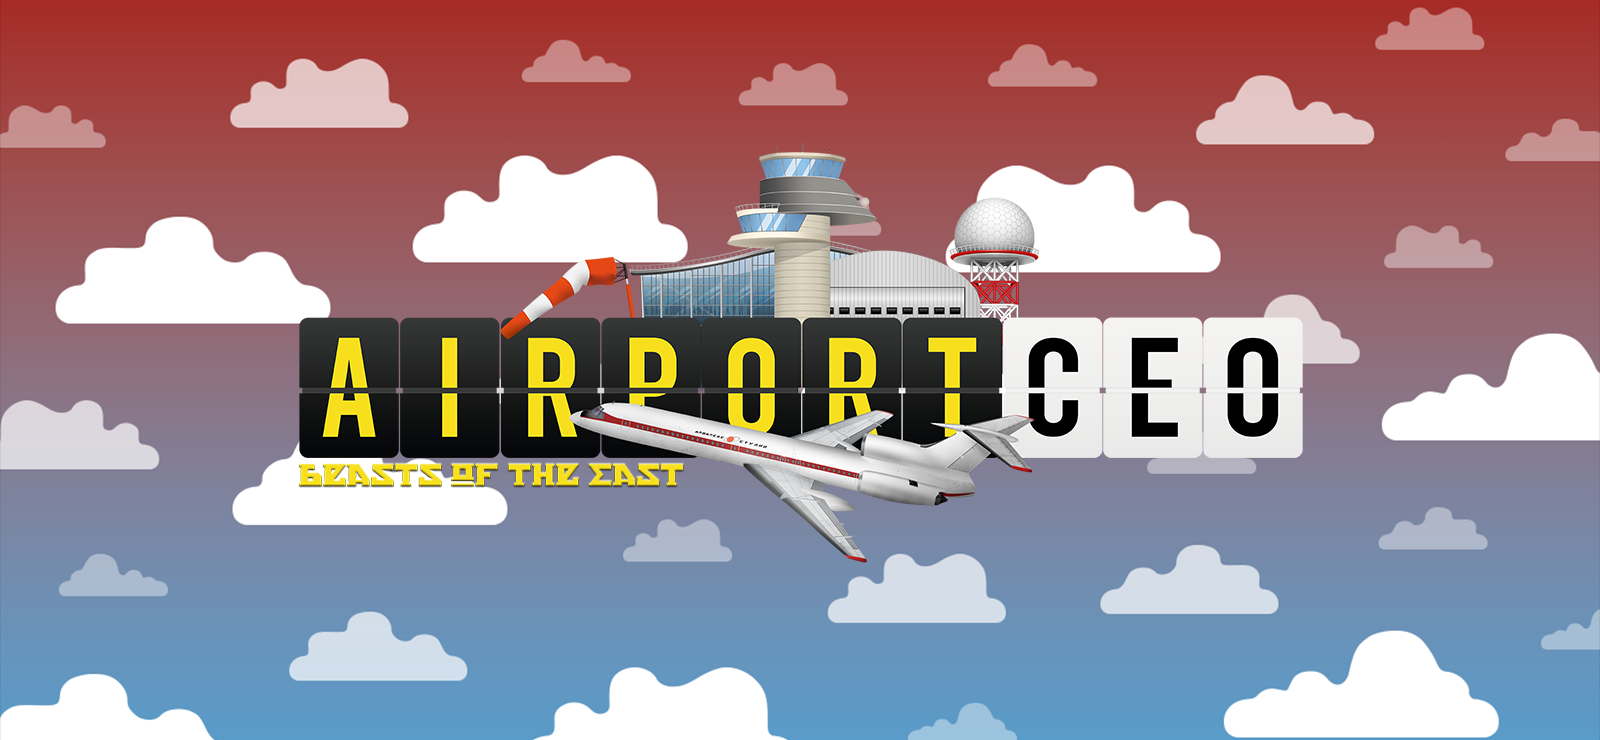 Airport CEO - Beasts Of The East